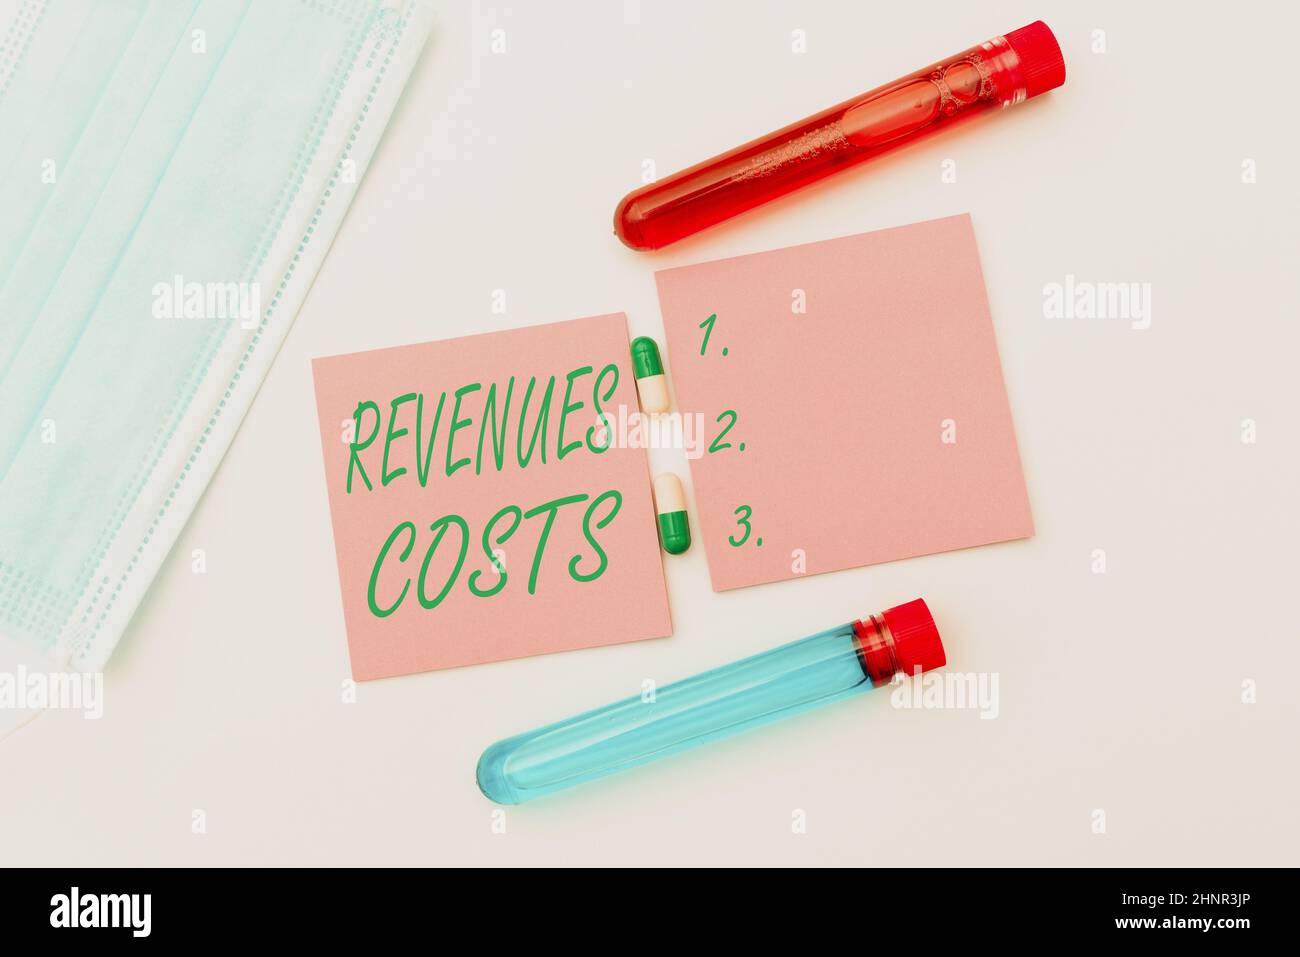 Writing displaying text Revenues Costs, Business approach Total amount of money in Manufacturing and Delivery a product Spreading Virus Awareness Mess Stock Photo